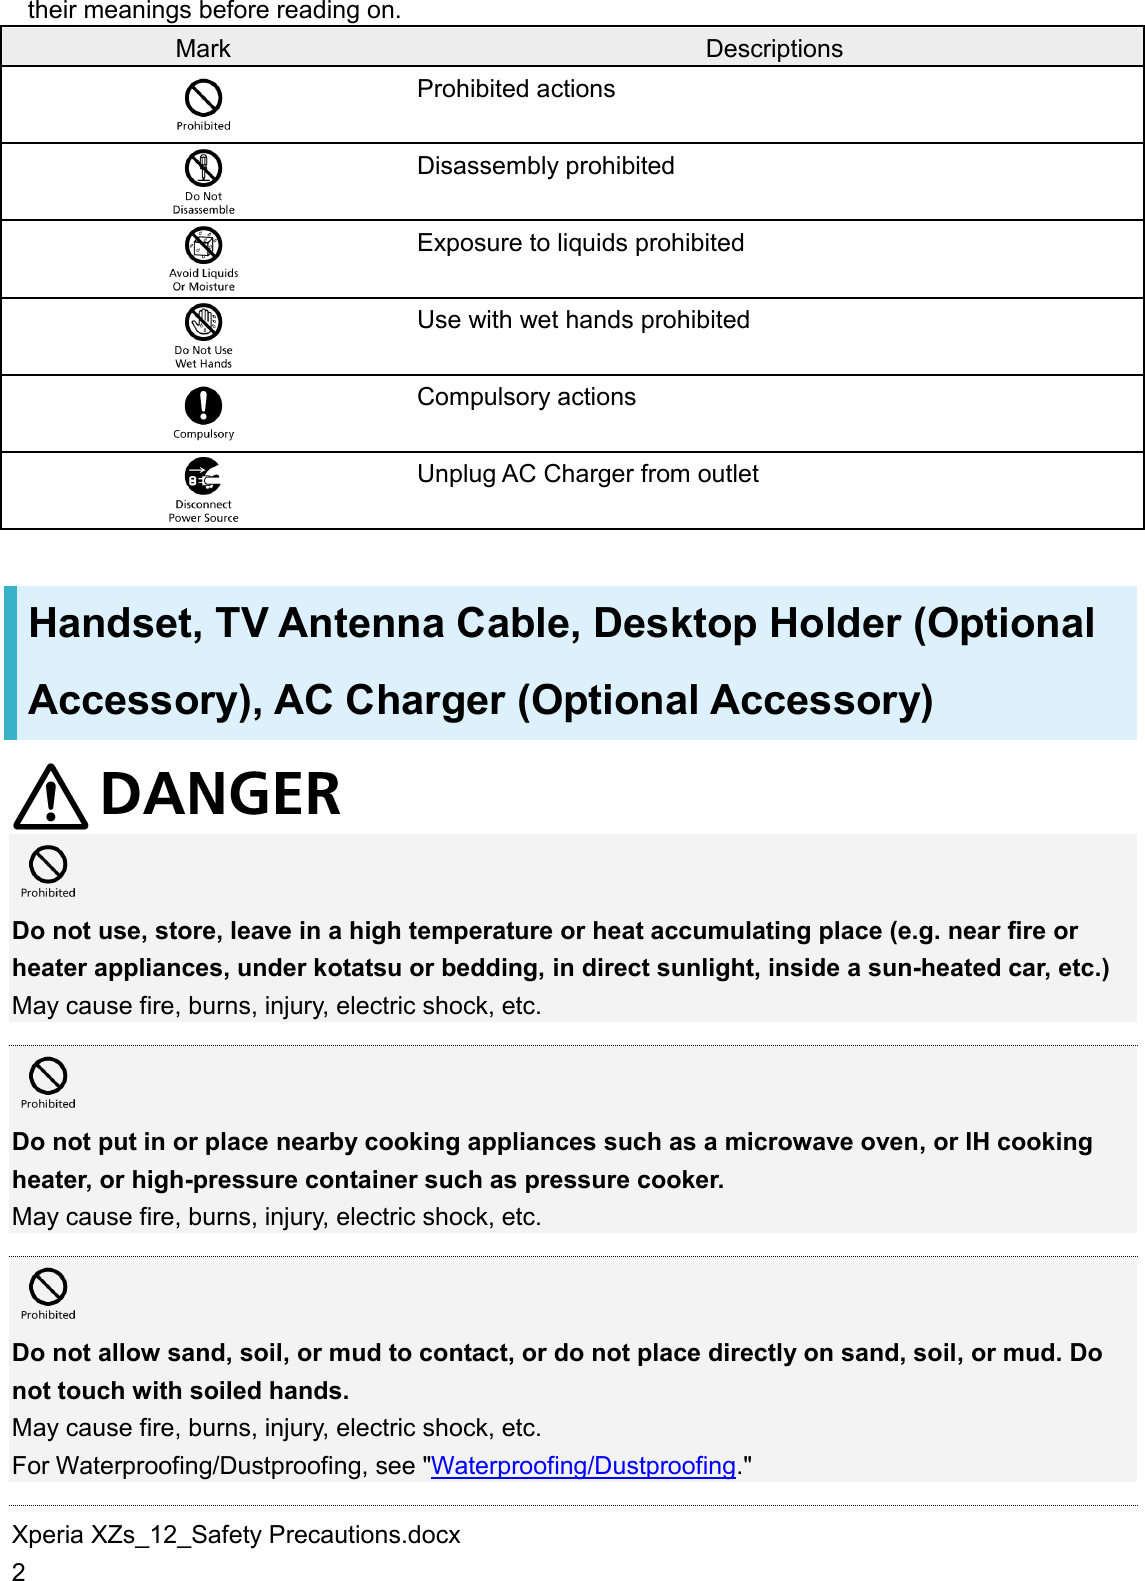 Xperia XZs_12_Safety Precautions.docx 2 their meanings before reading on. Mark Descriptions  Prohibited actions  Disassembly prohibited  Exposure to liquids prohibited  Use with wet hands prohibited  Compulsory actions  Unplug AC Charger from outlet Handset, TV Antenna Cable, Desktop Holder (Optional Accessory), AC Charger (Optional Accessory)   Do not use, store, leave in a high temperature or heat accumulating place (e.g. near fire or heater appliances, under kotatsu or bedding, in direct sunlight, inside a sun-heated car, etc.) May cause fire, burns, injury, electric shock, etc.   Do not put in or place nearby cooking appliances such as a microwave oven, or IH cooking heater, or high-pressure container such as pressure cooker. May cause fire, burns, injury, electric shock, etc.   Do not allow sand, soil, or mud to contact, or do not place directly on sand, soil, or mud. Do not touch with soiled hands. May cause fire, burns, injury, electric shock, etc. For Waterproofing/Dustproofing, see &quot;Waterproofing/Dustproofing.&quot;  